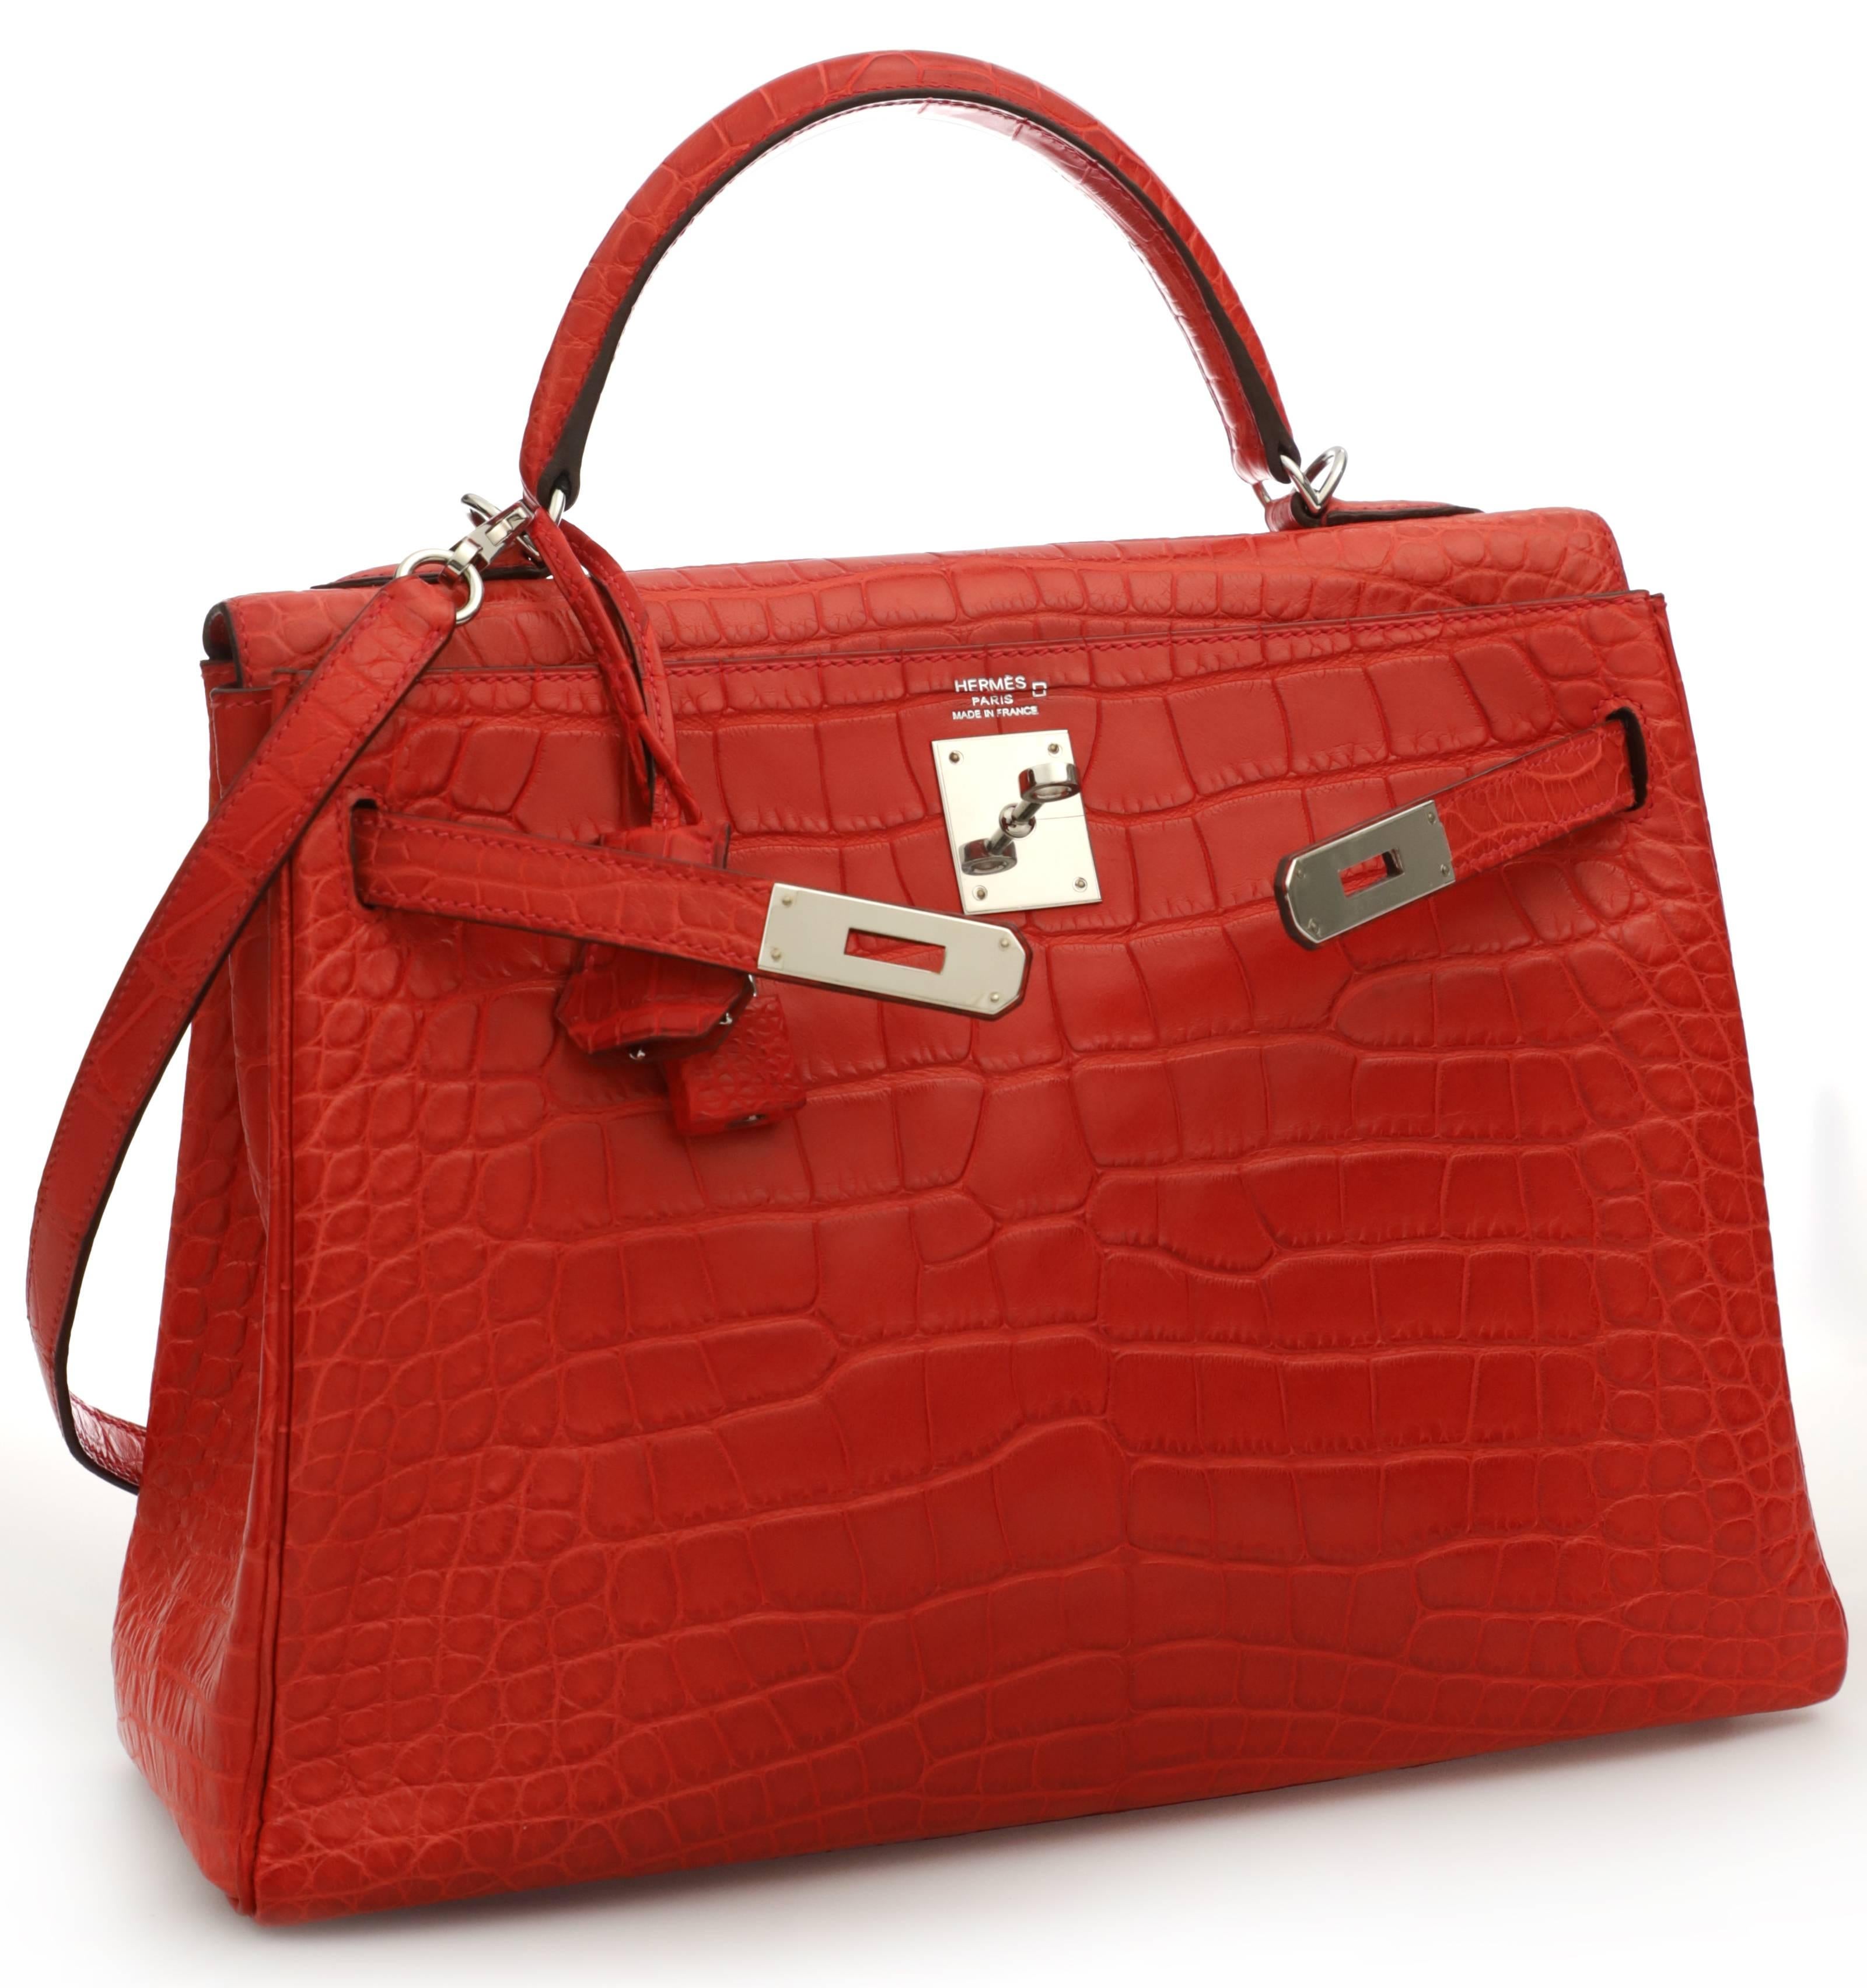 HERMES Kelly 32 rouge pivoine alligator mat with palladium hardware. Appears to have been used a few times. The hardware still features plastic protections and is in excellent condition. Feet don't show plastic protection and are slightly scuffed.